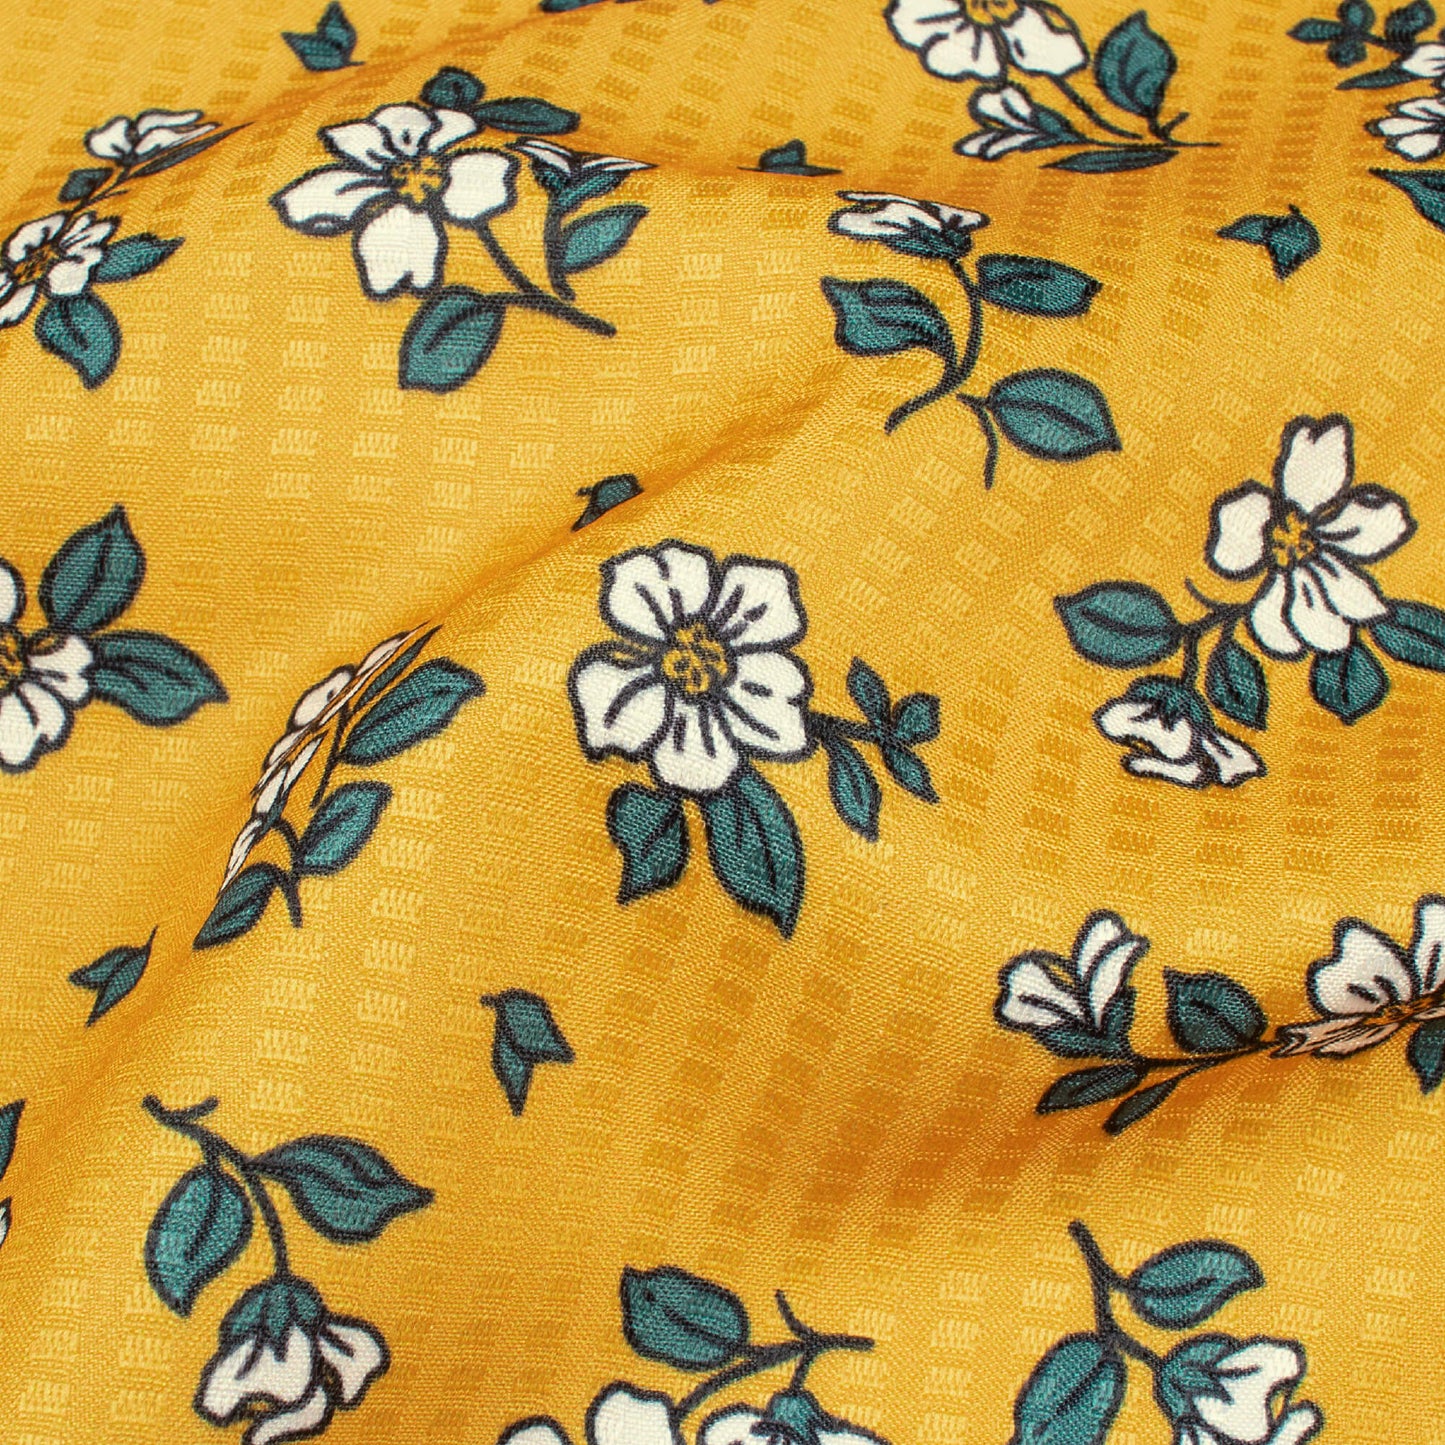 Tuscany Yellow And White Floral Pattern Digital Print Sherwani Fabric (Width 58 Inches)